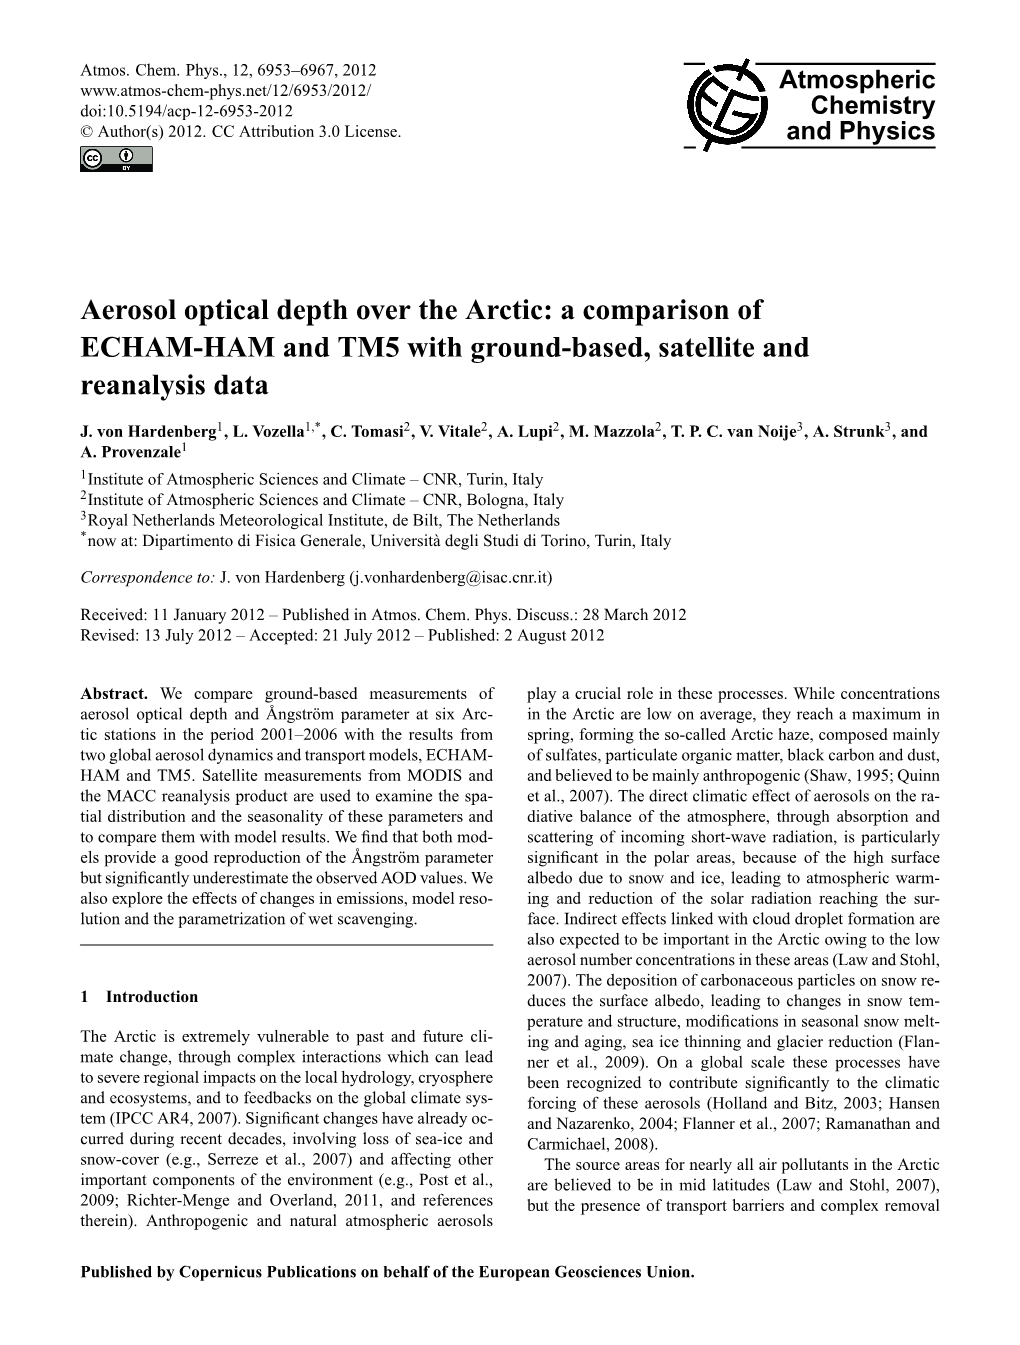 Aerosol Optical Depth Over the Arctic: a Comparison of ECHAM-HAM and TM5 with Ground-Based, Satellite and Reanalysis Data